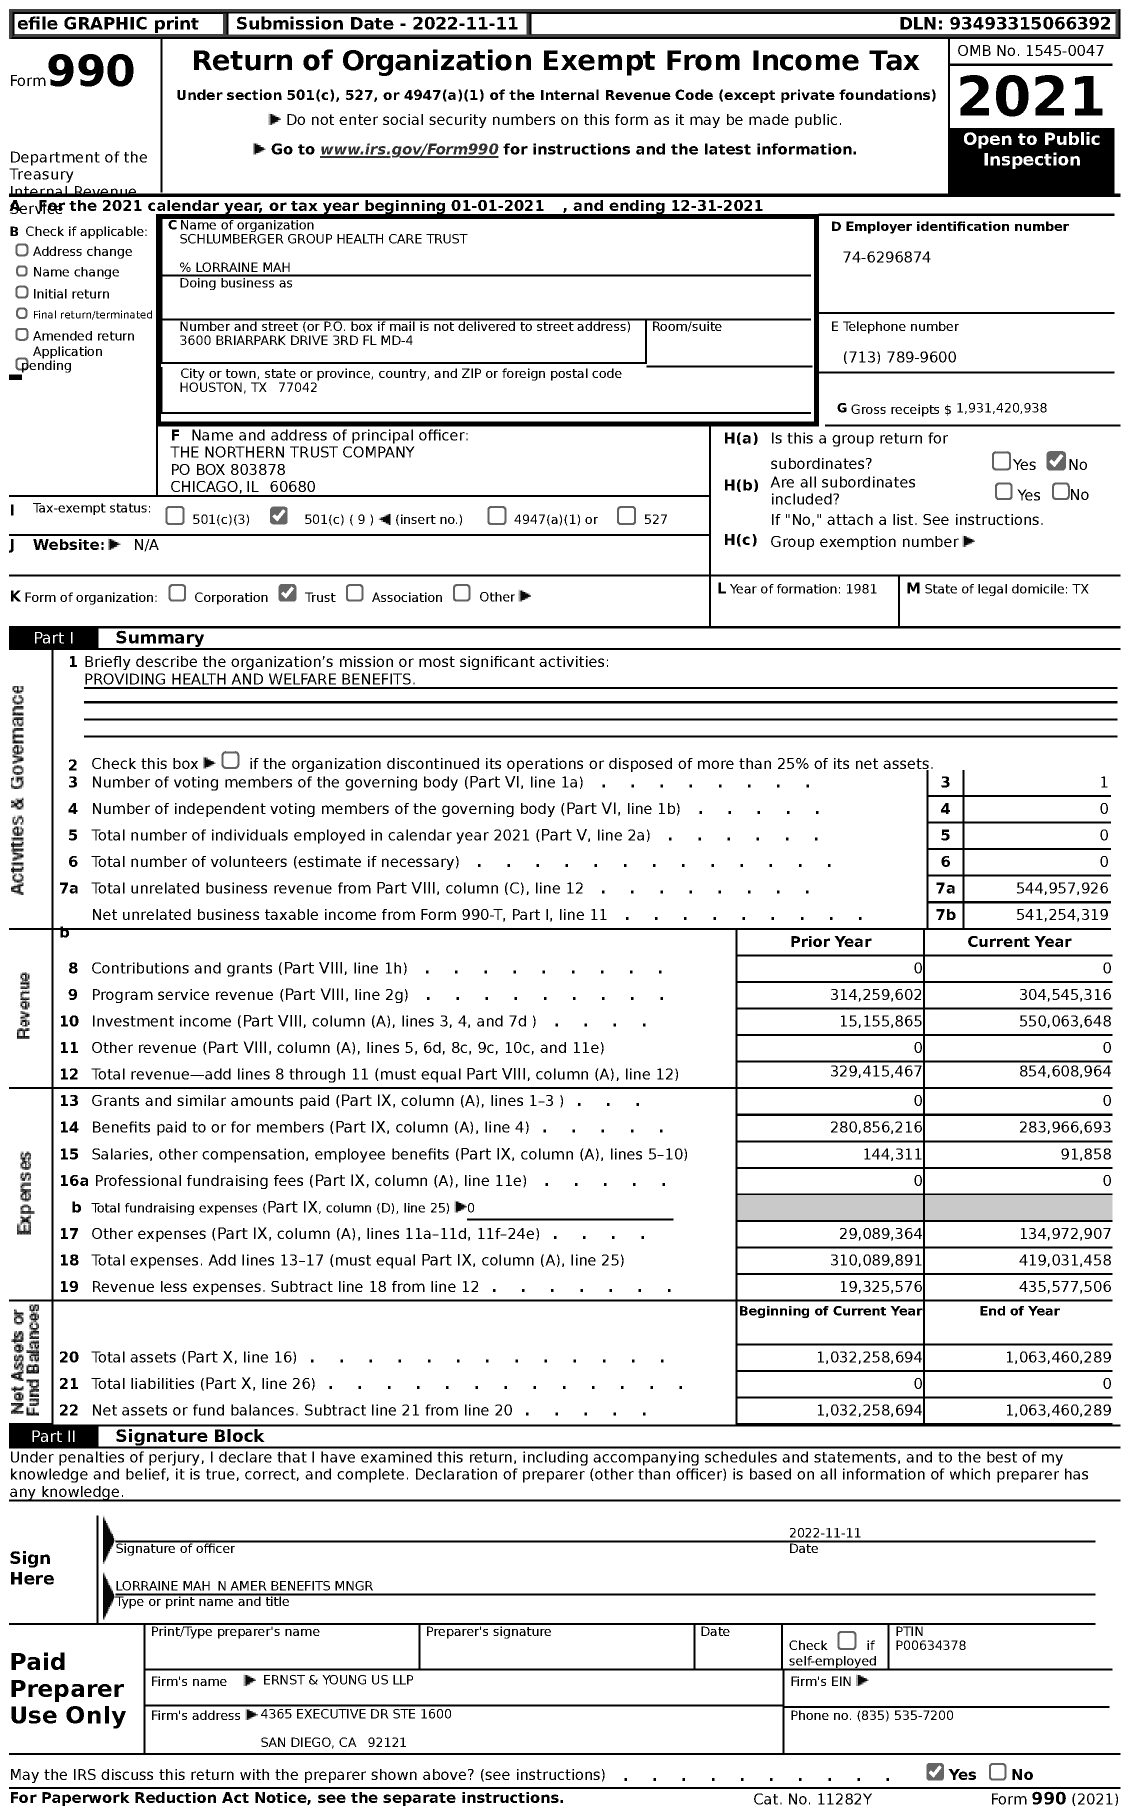 Image of first page of 2021 Form 990 for Sclumberger Group Health Care Trust